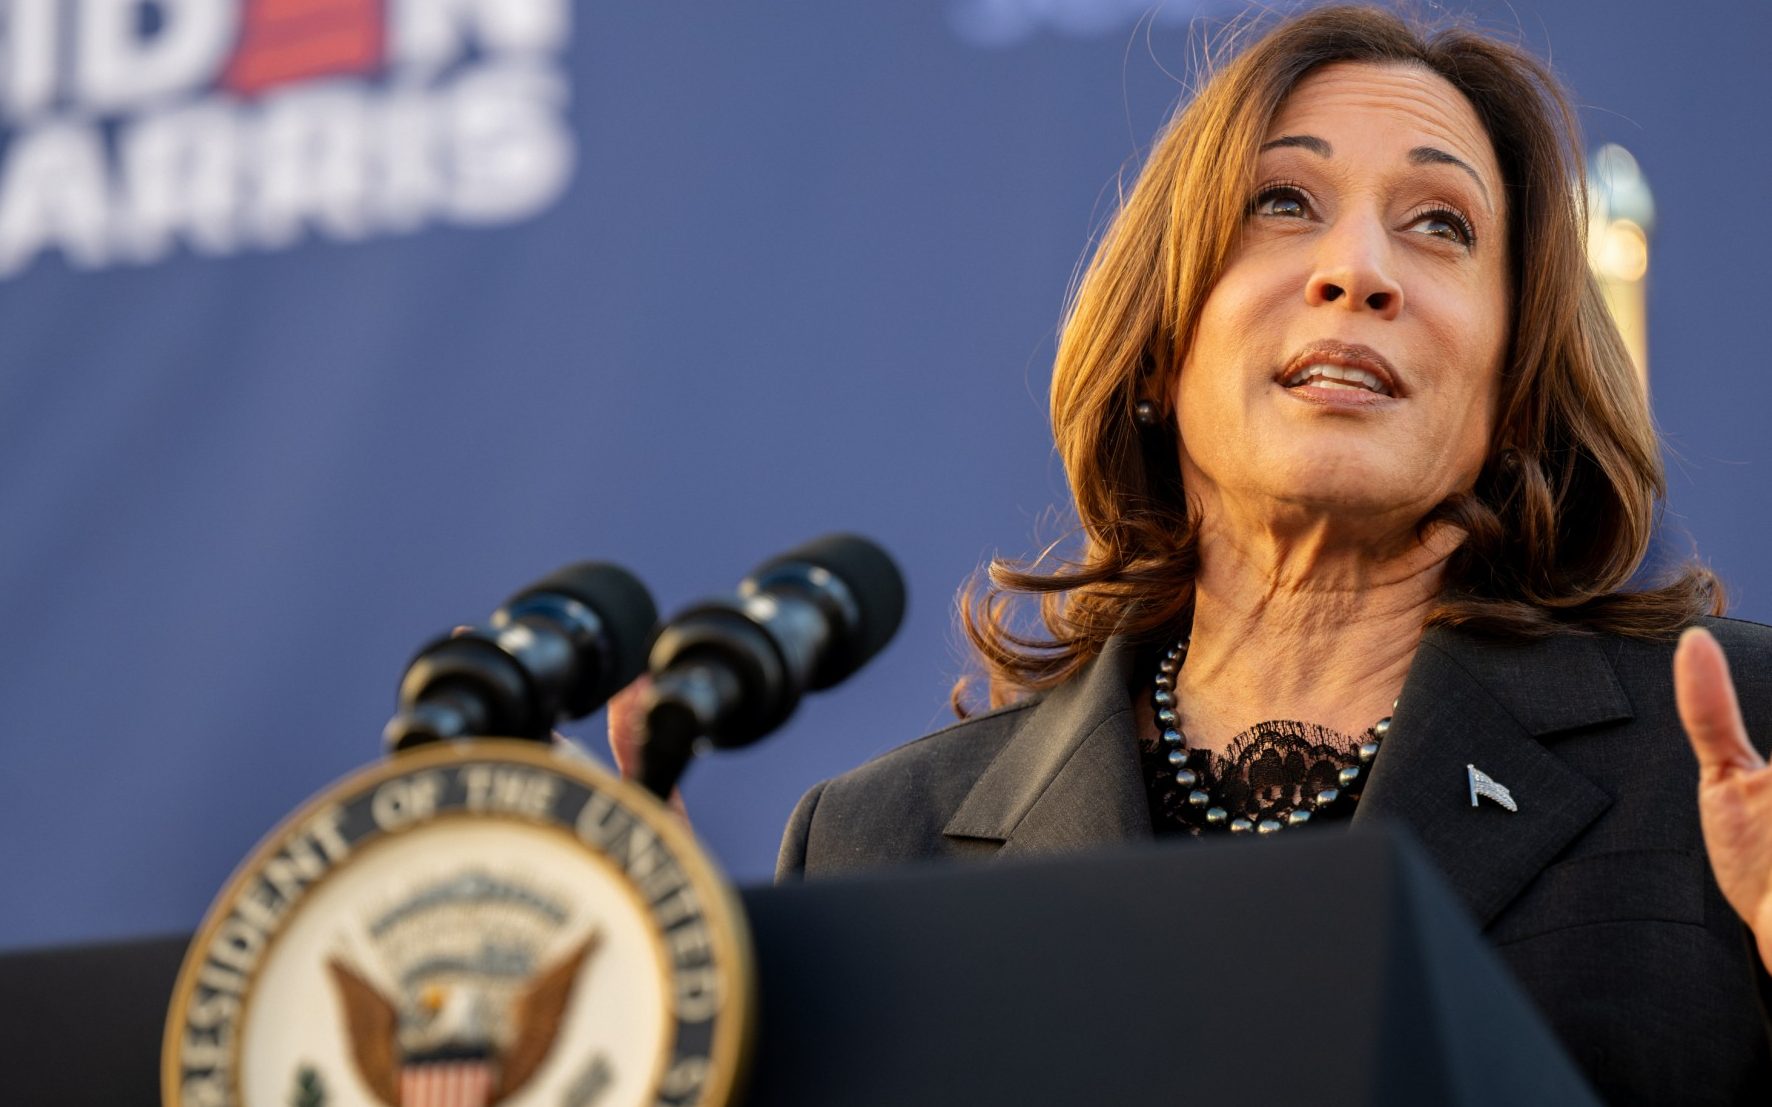 kamala harris says she is ‘ready to lead’ despite polling at a record low